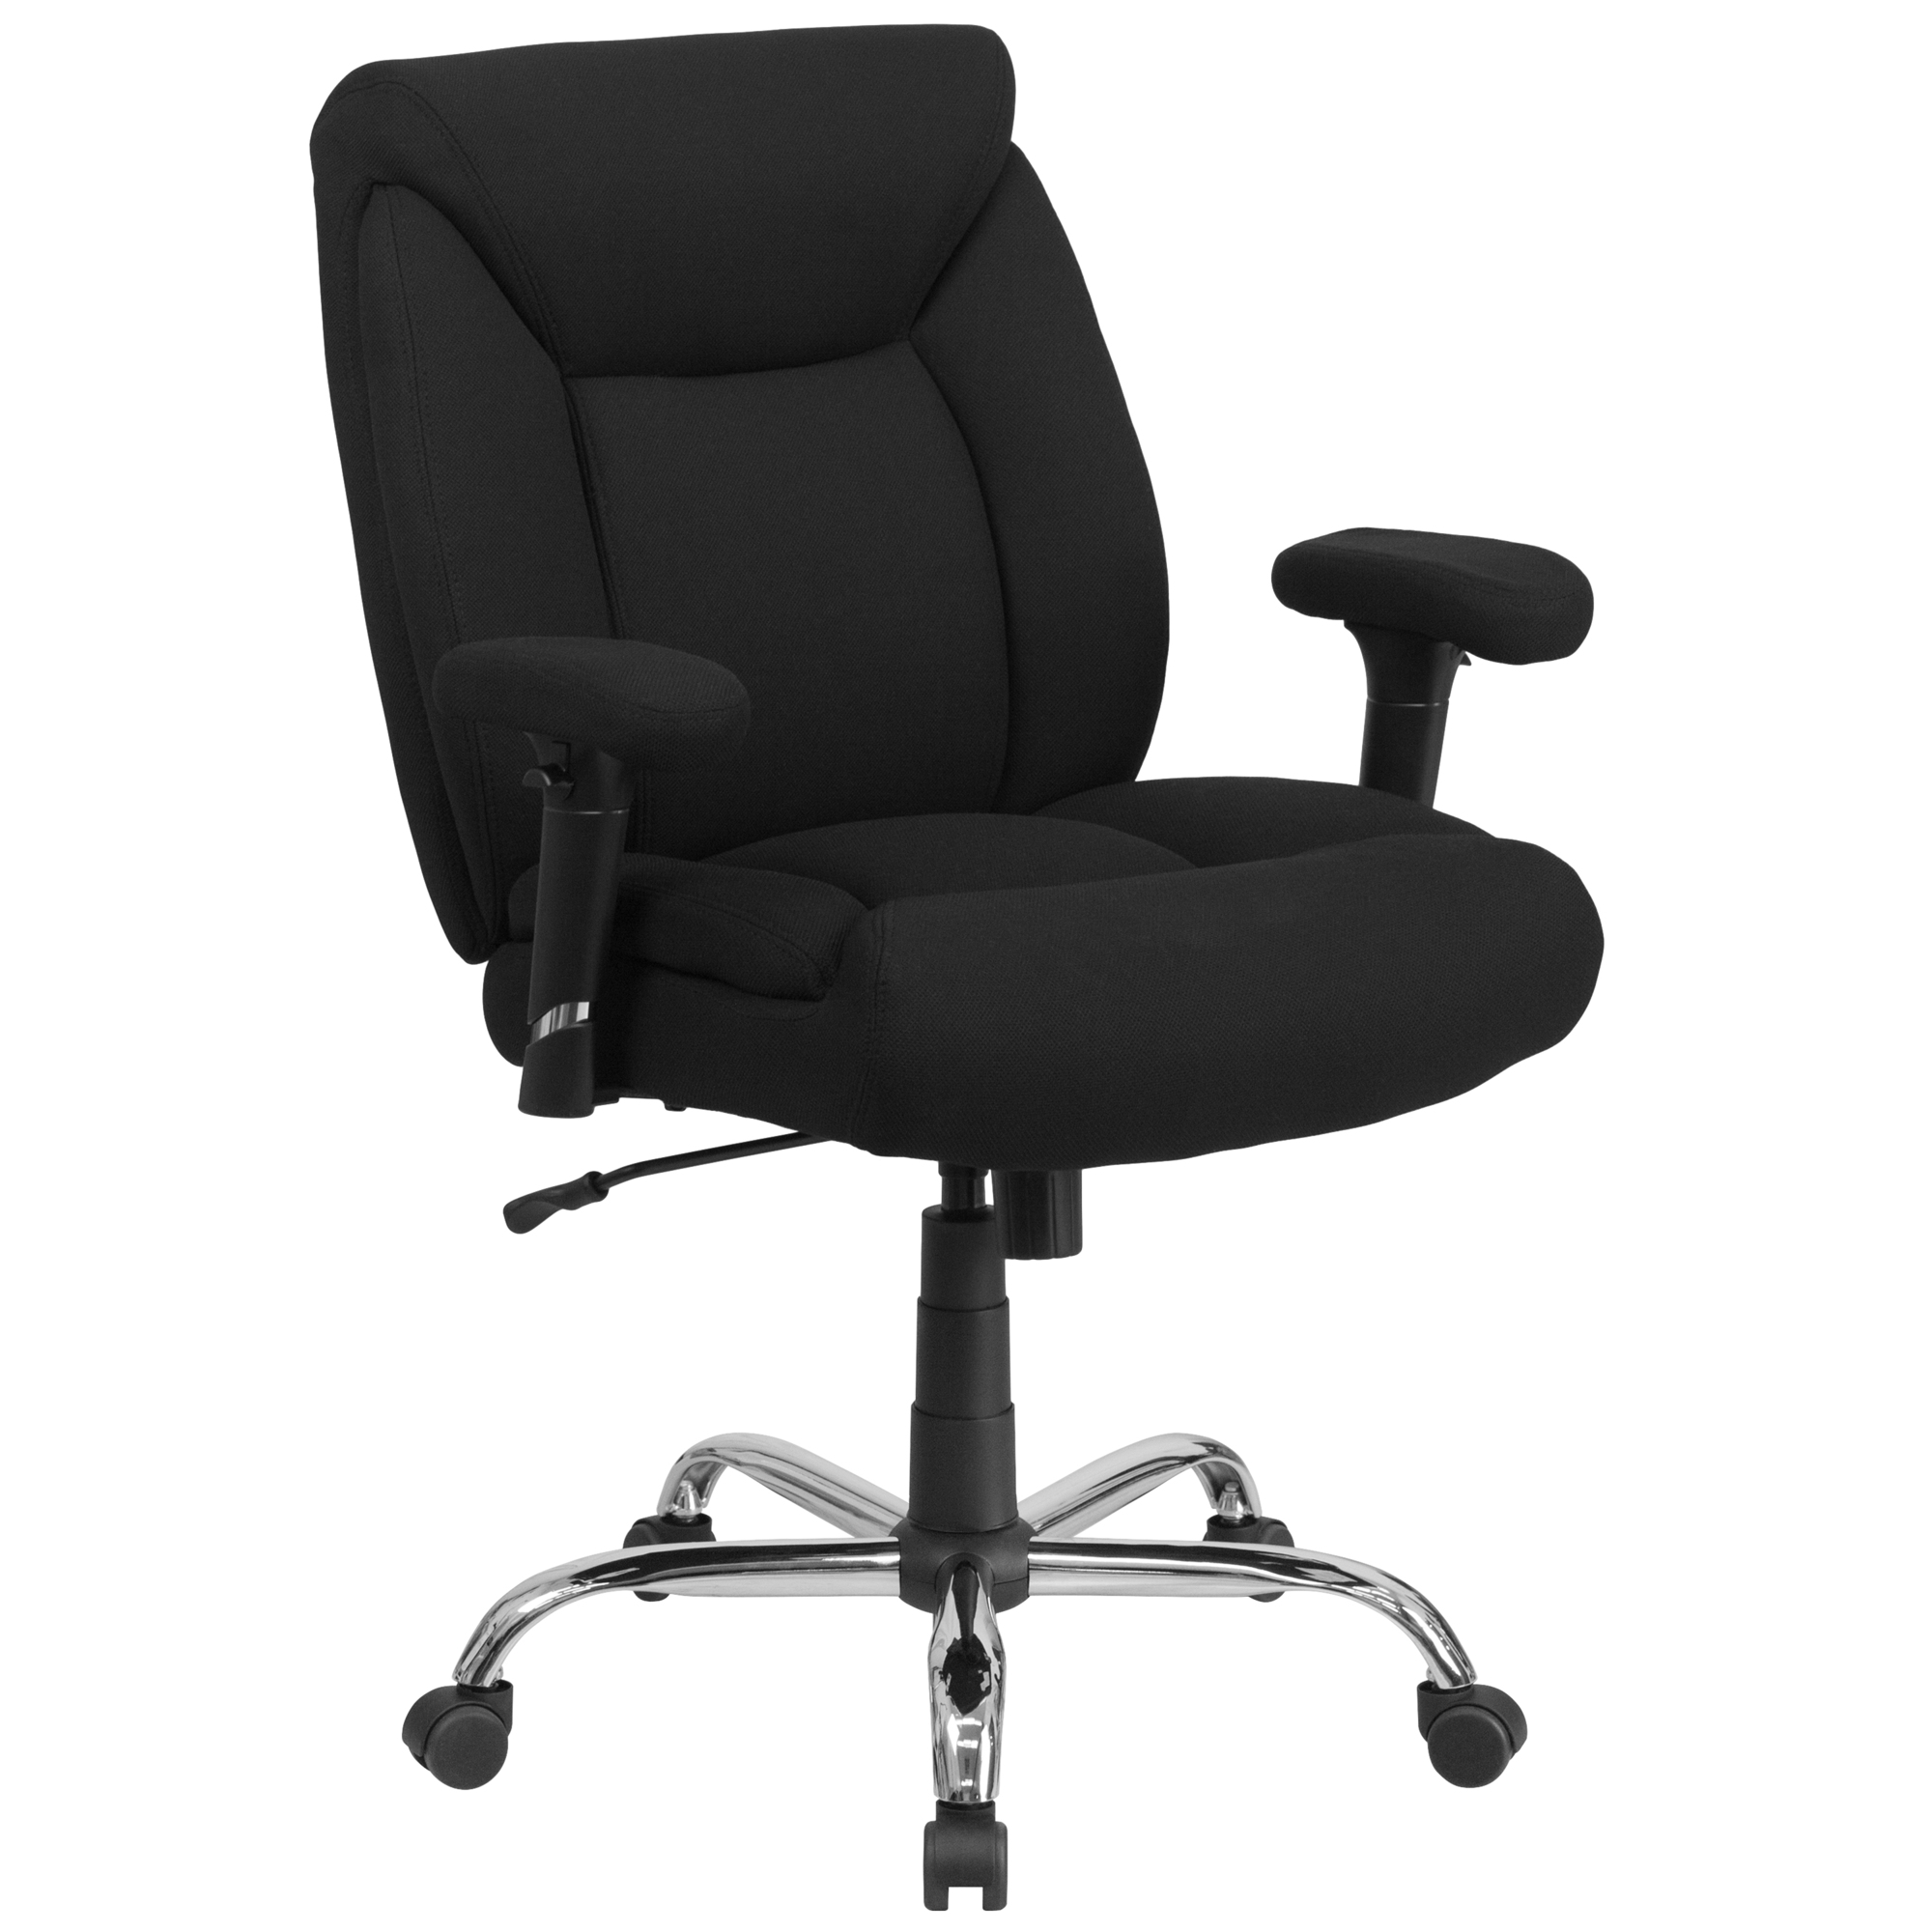 Flash Furniture, 400 lb. Rated Mid-Back Black Fabric Office Chair, Primary Color Black, Included (qty.) 1, Model GO2073F